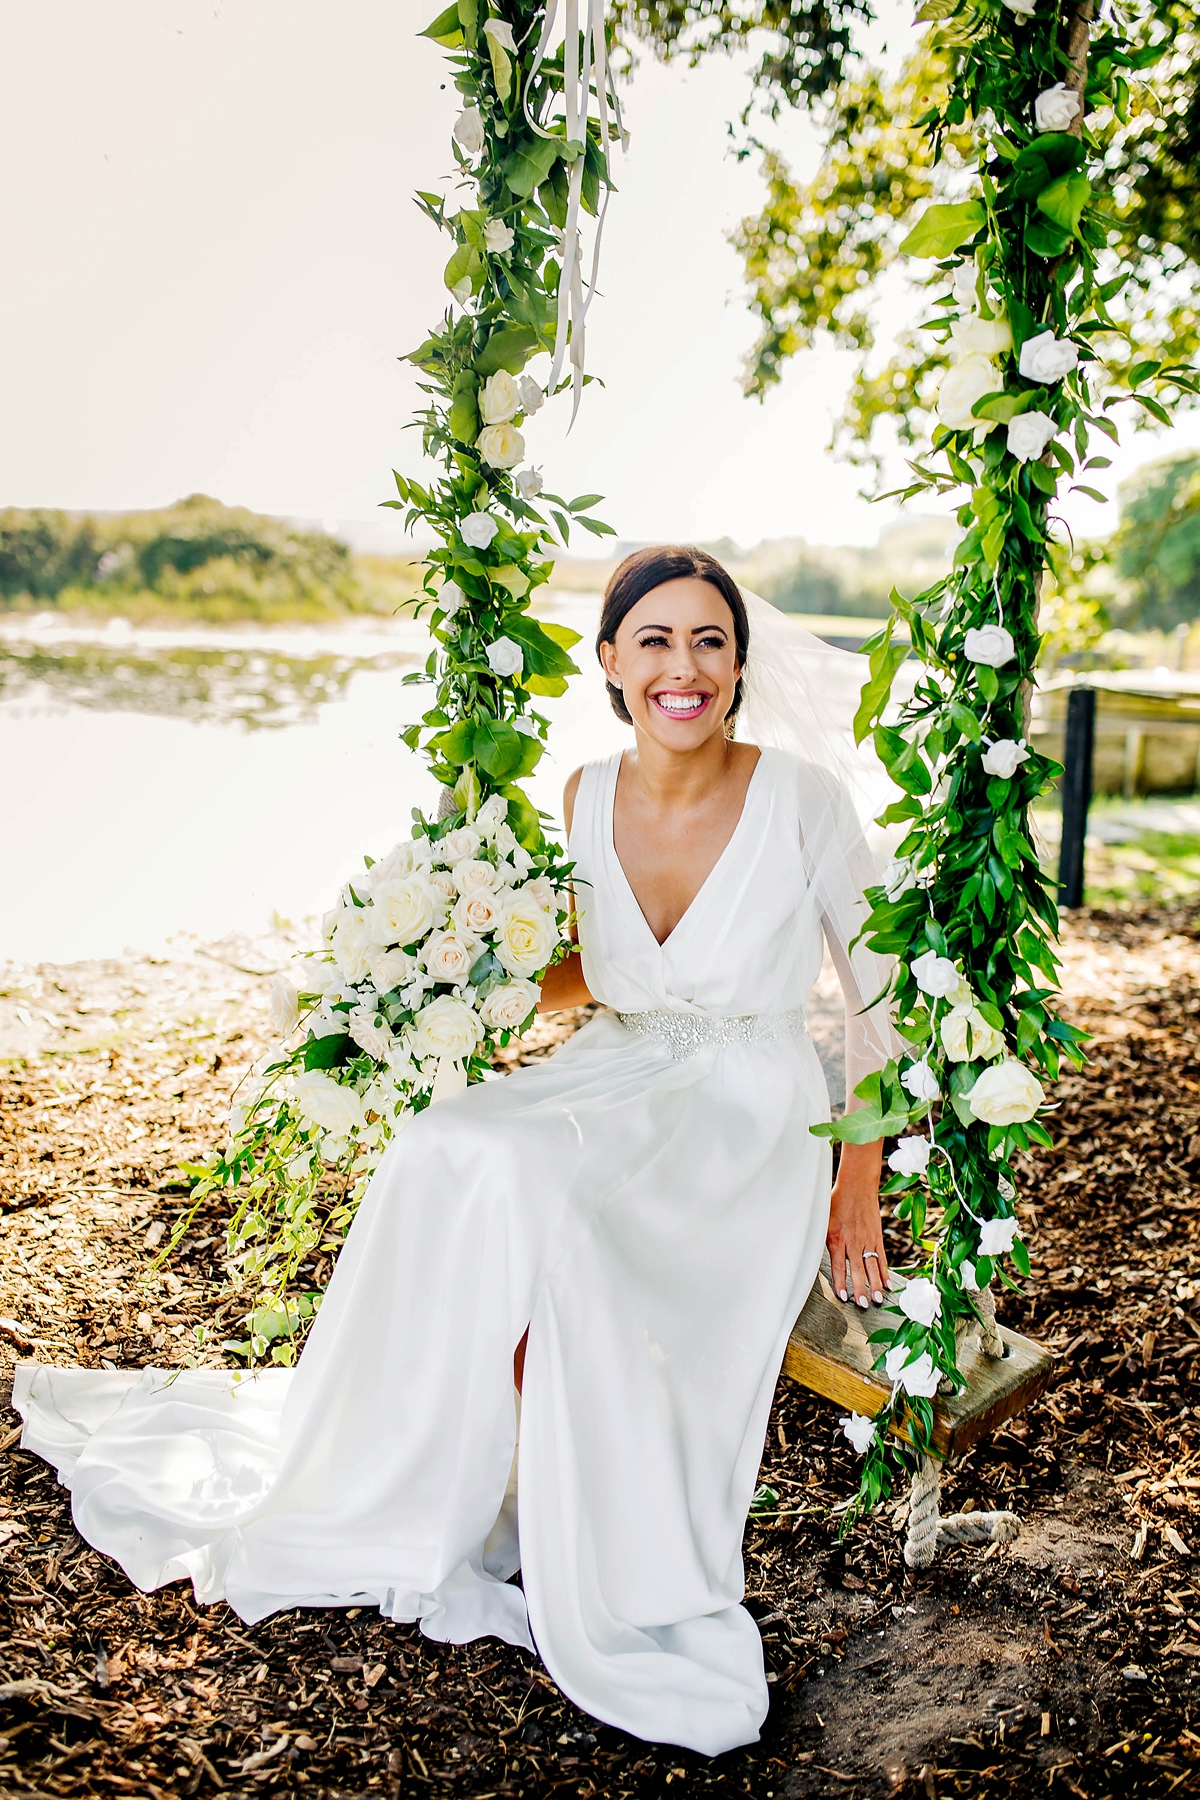 23 A Charlie Brear dress for a timeless Beachside wedding in greens and neutrals